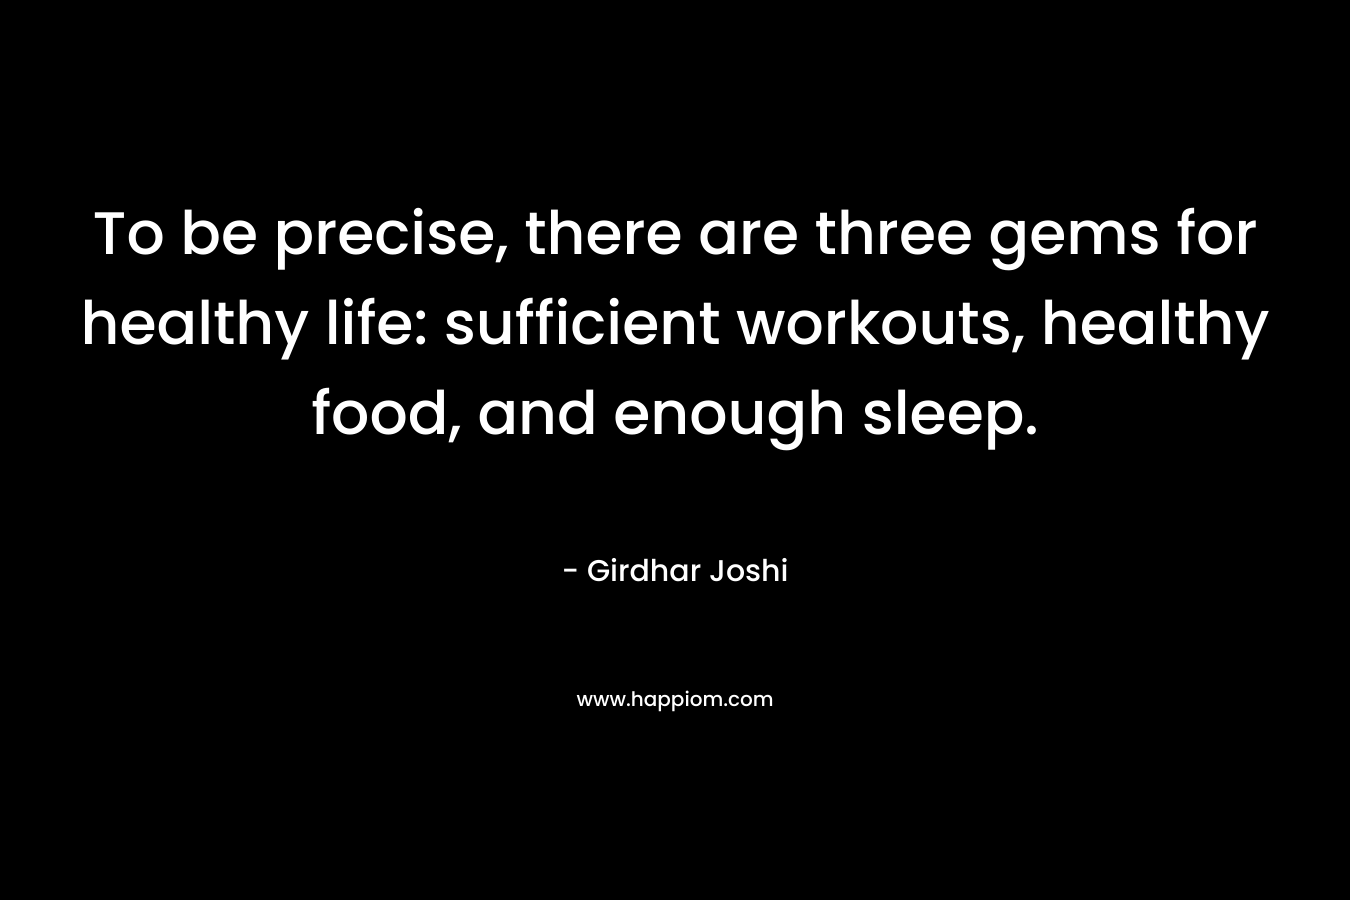 To be precise, there are three gems for healthy life: sufficient workouts, healthy food, and enough sleep.